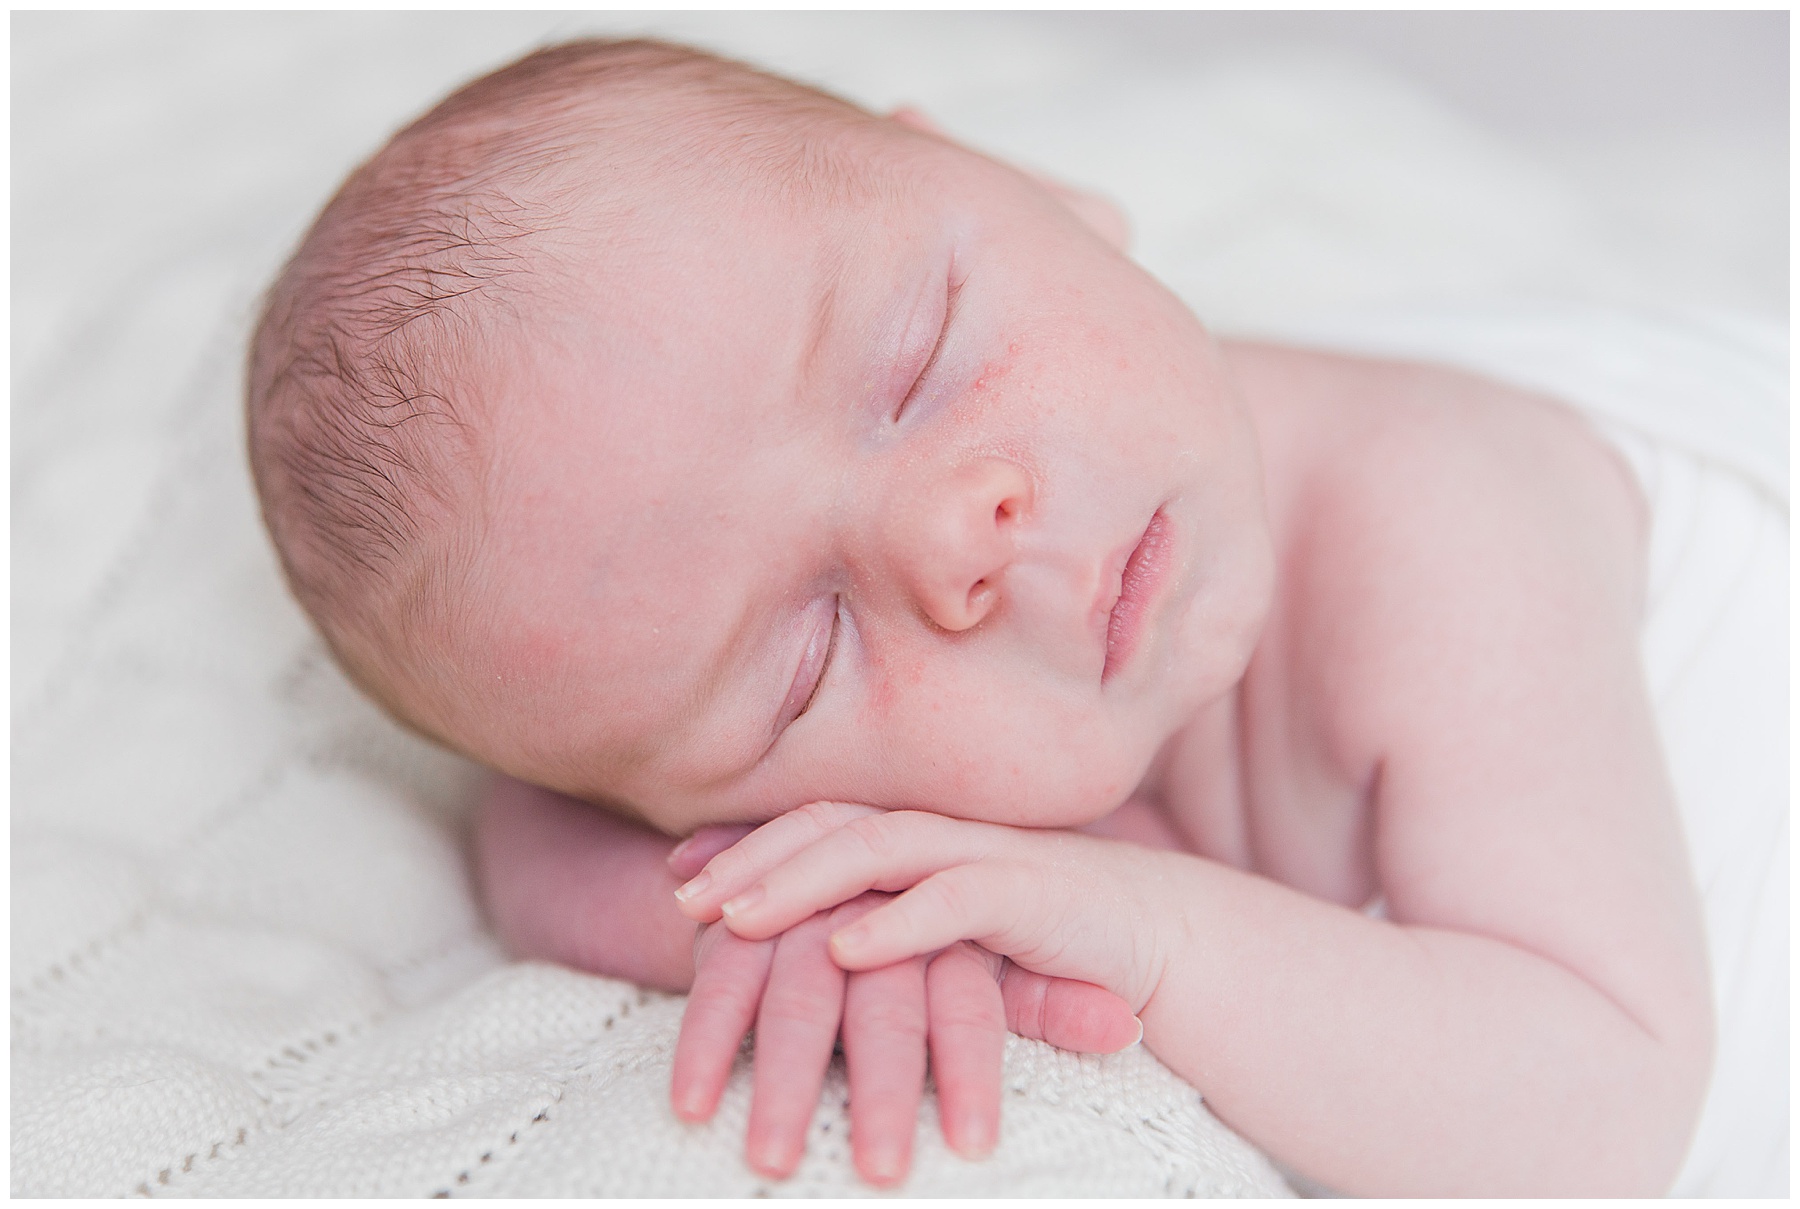 baby sleeping with hands propped